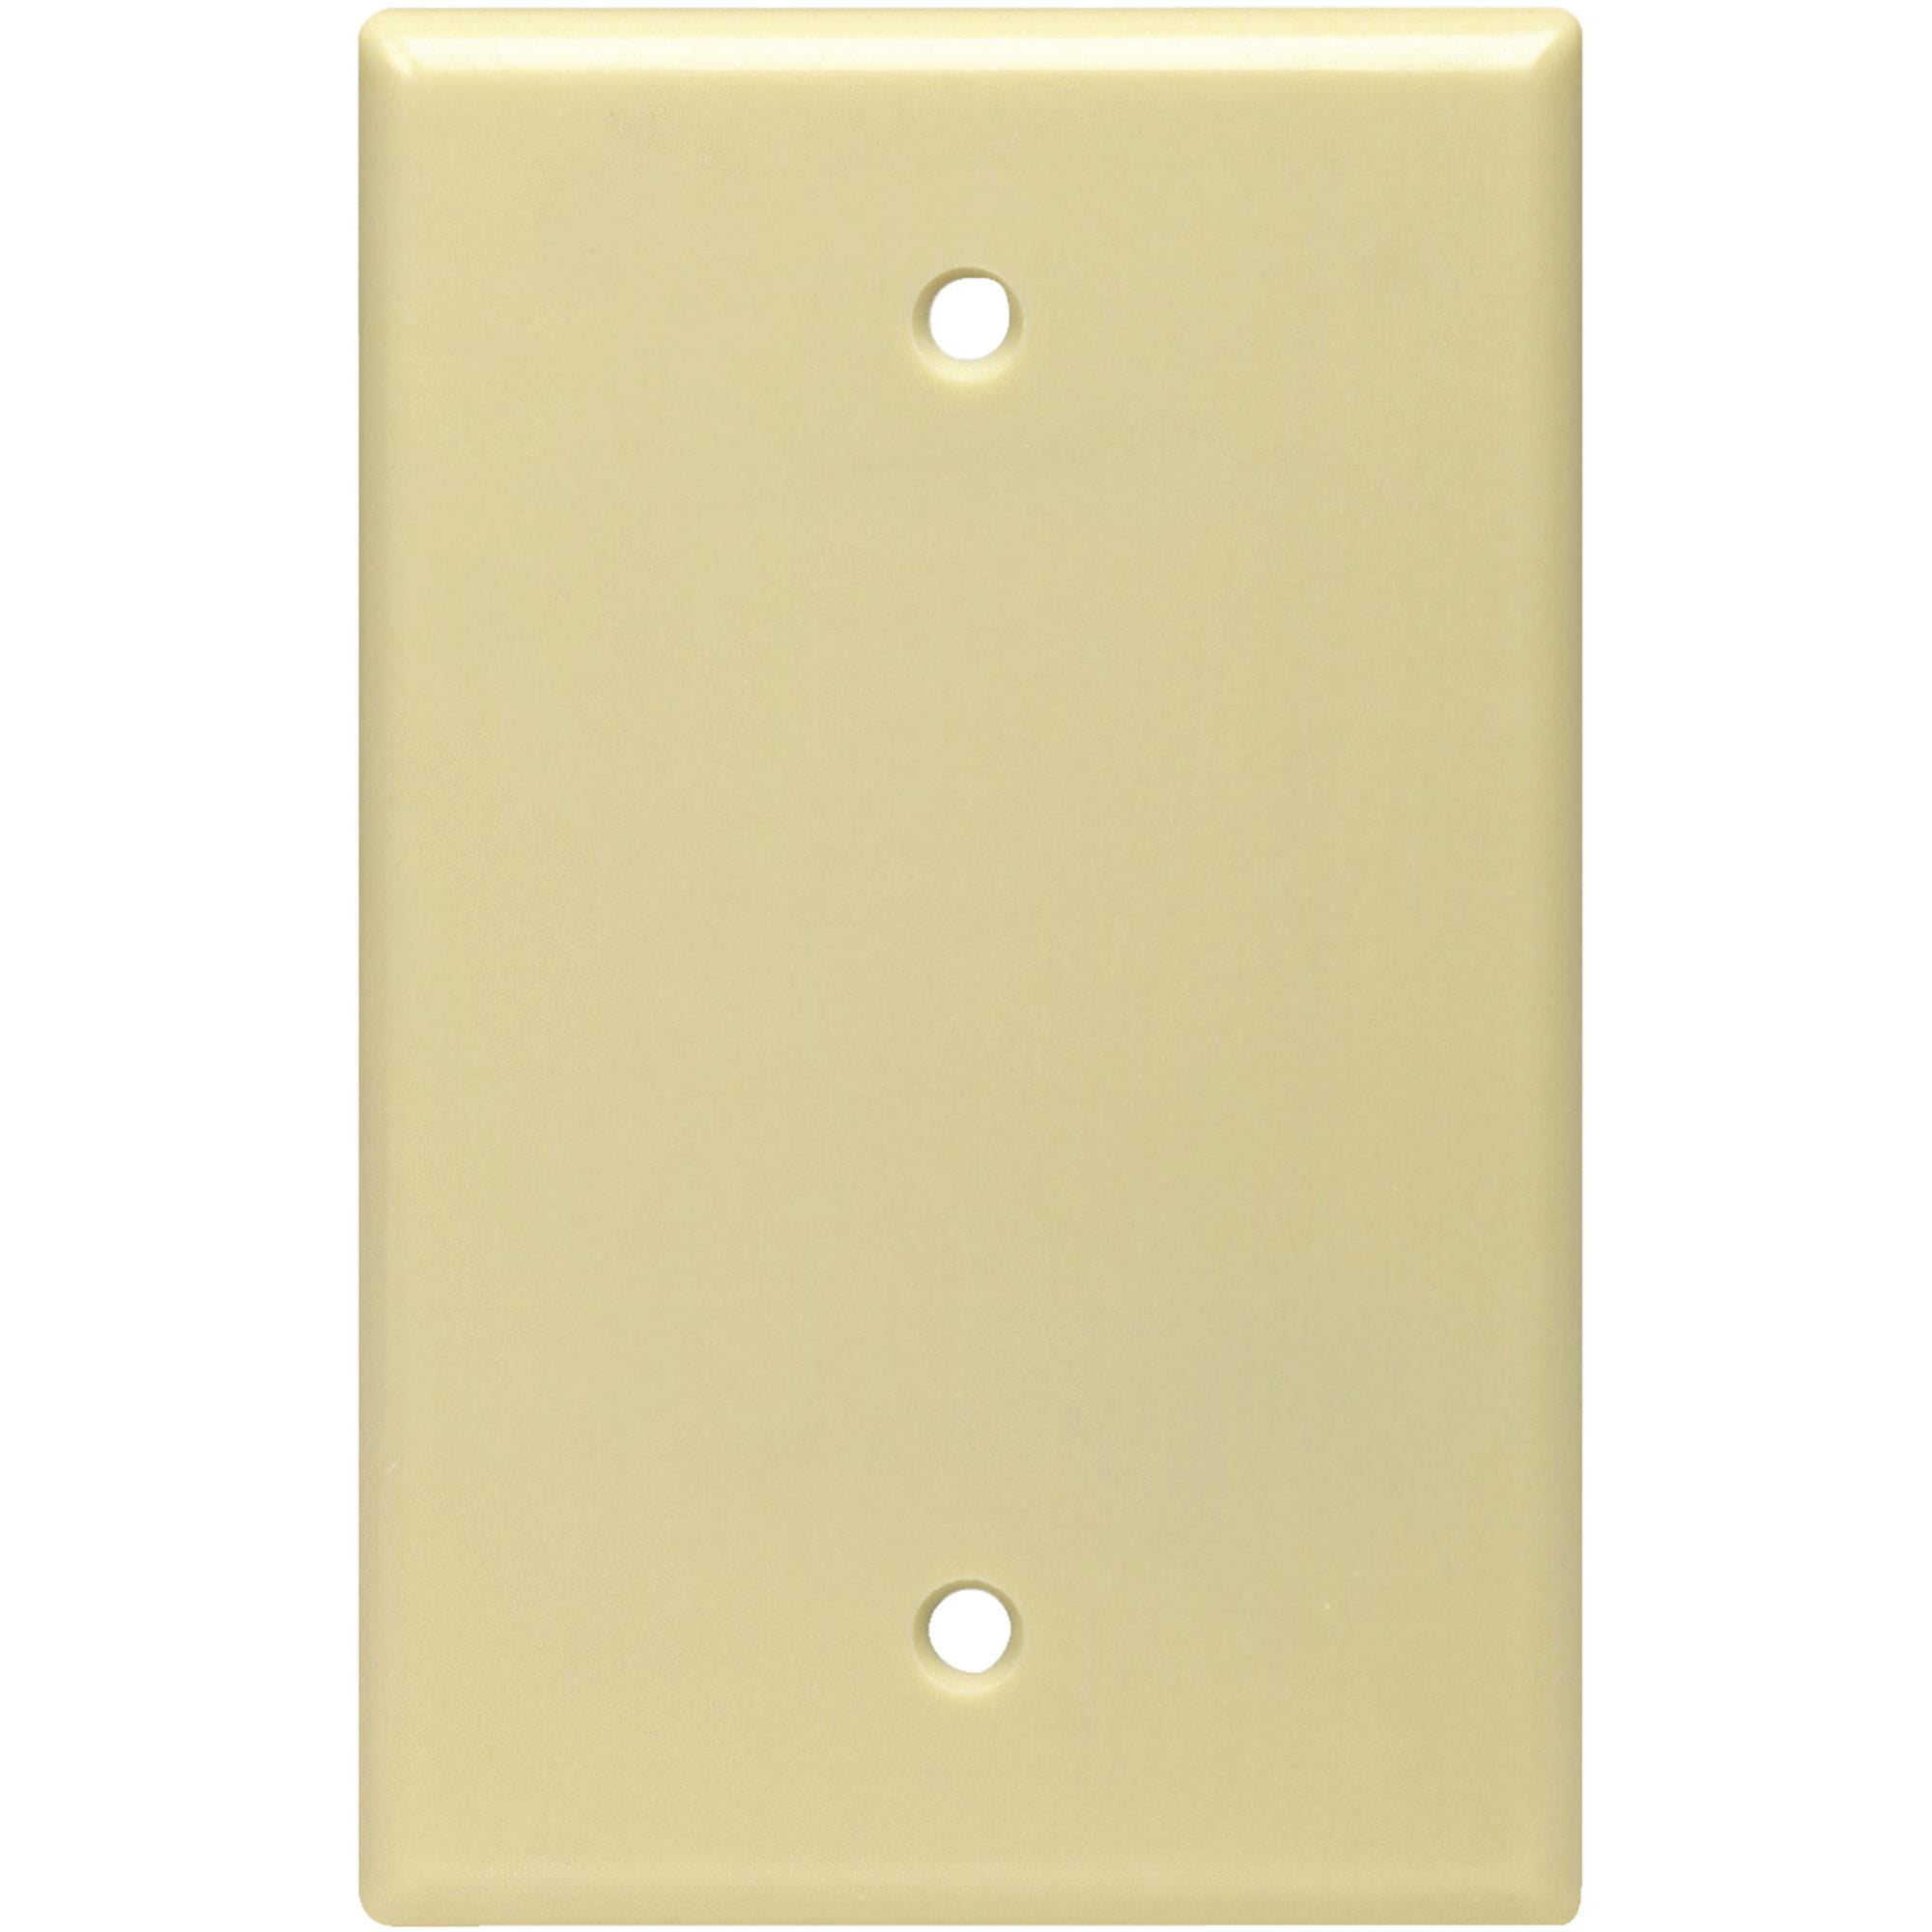 30 Leviton White Blank 1-Gang MIDWAY Box Mount Wallplate Plastic Covers 80514-W 